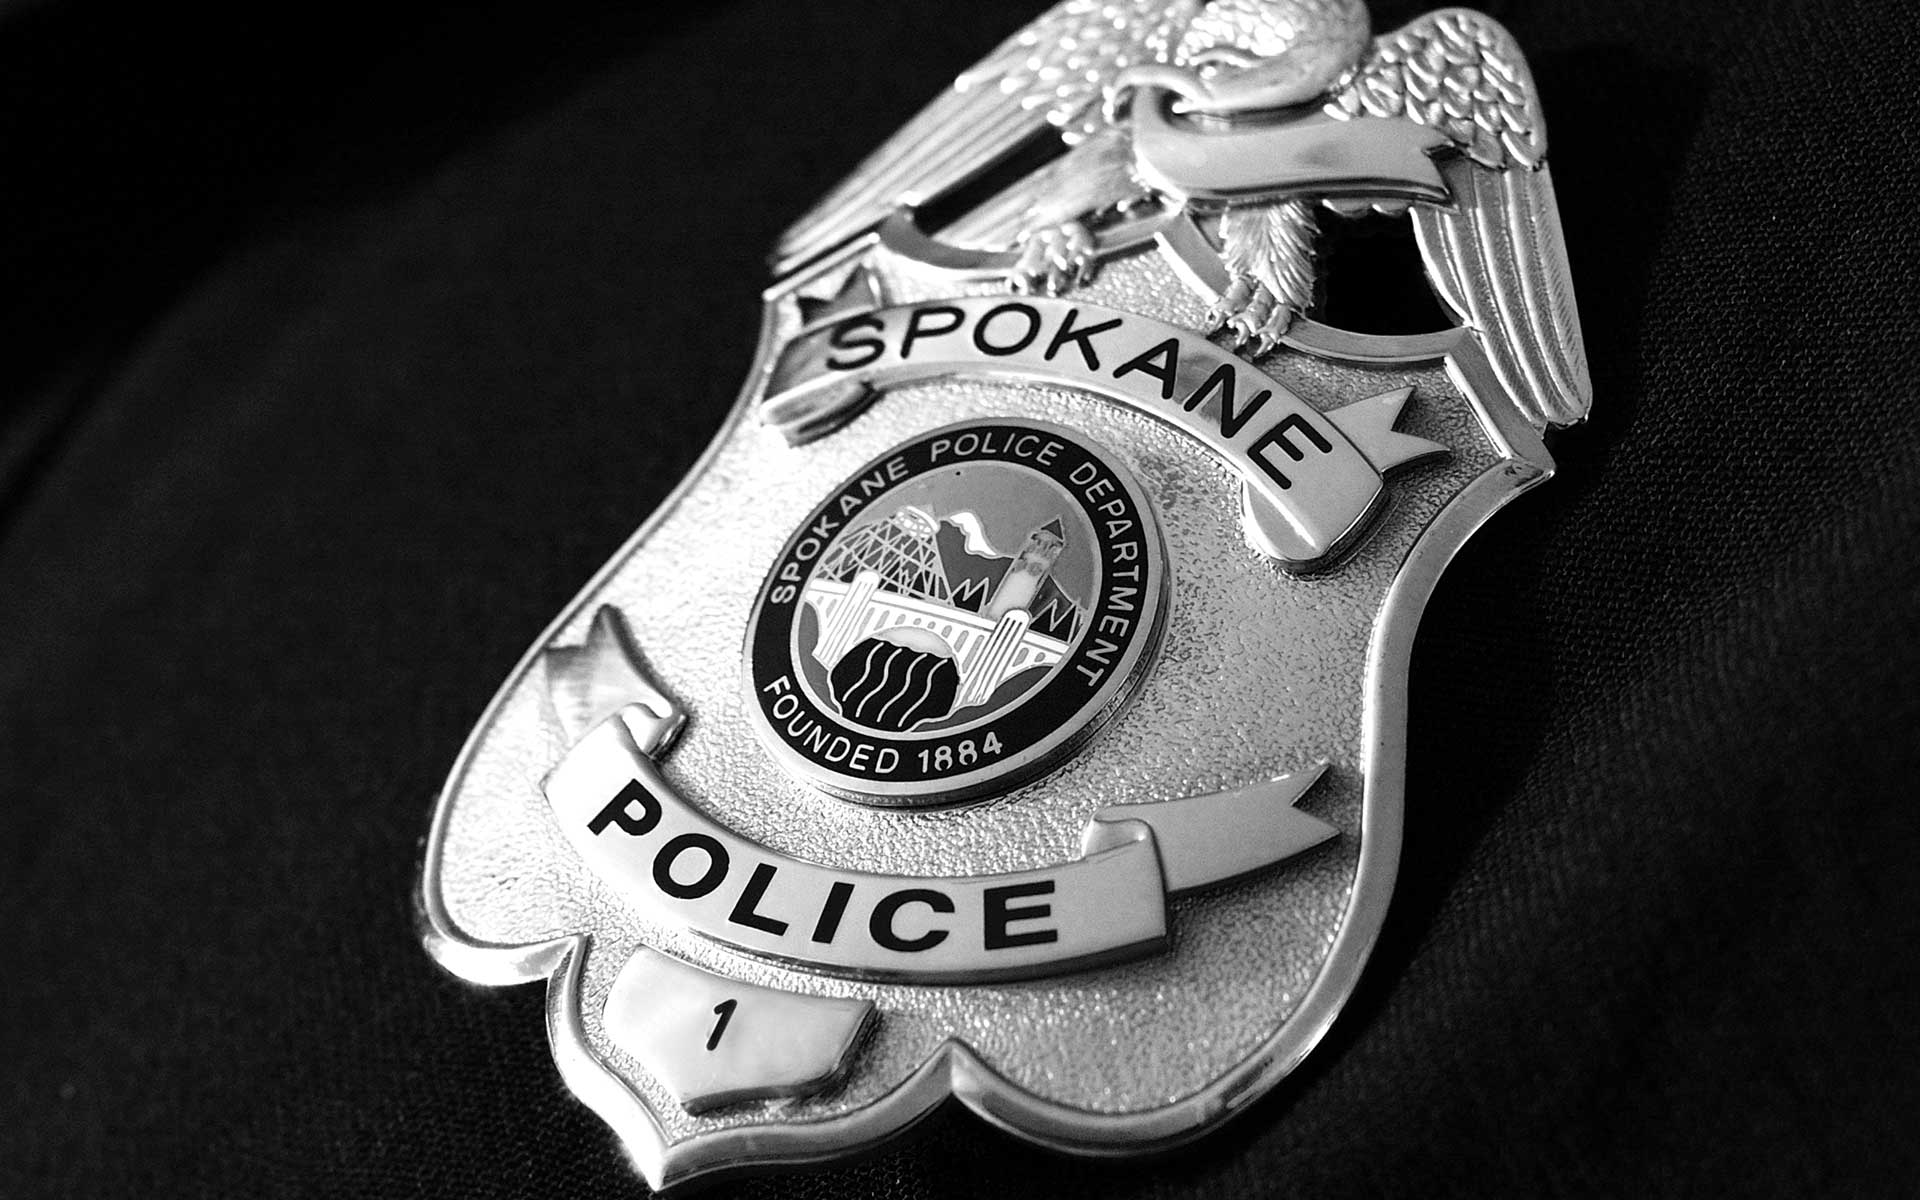  Officer Involved Shooting in North Spokane 